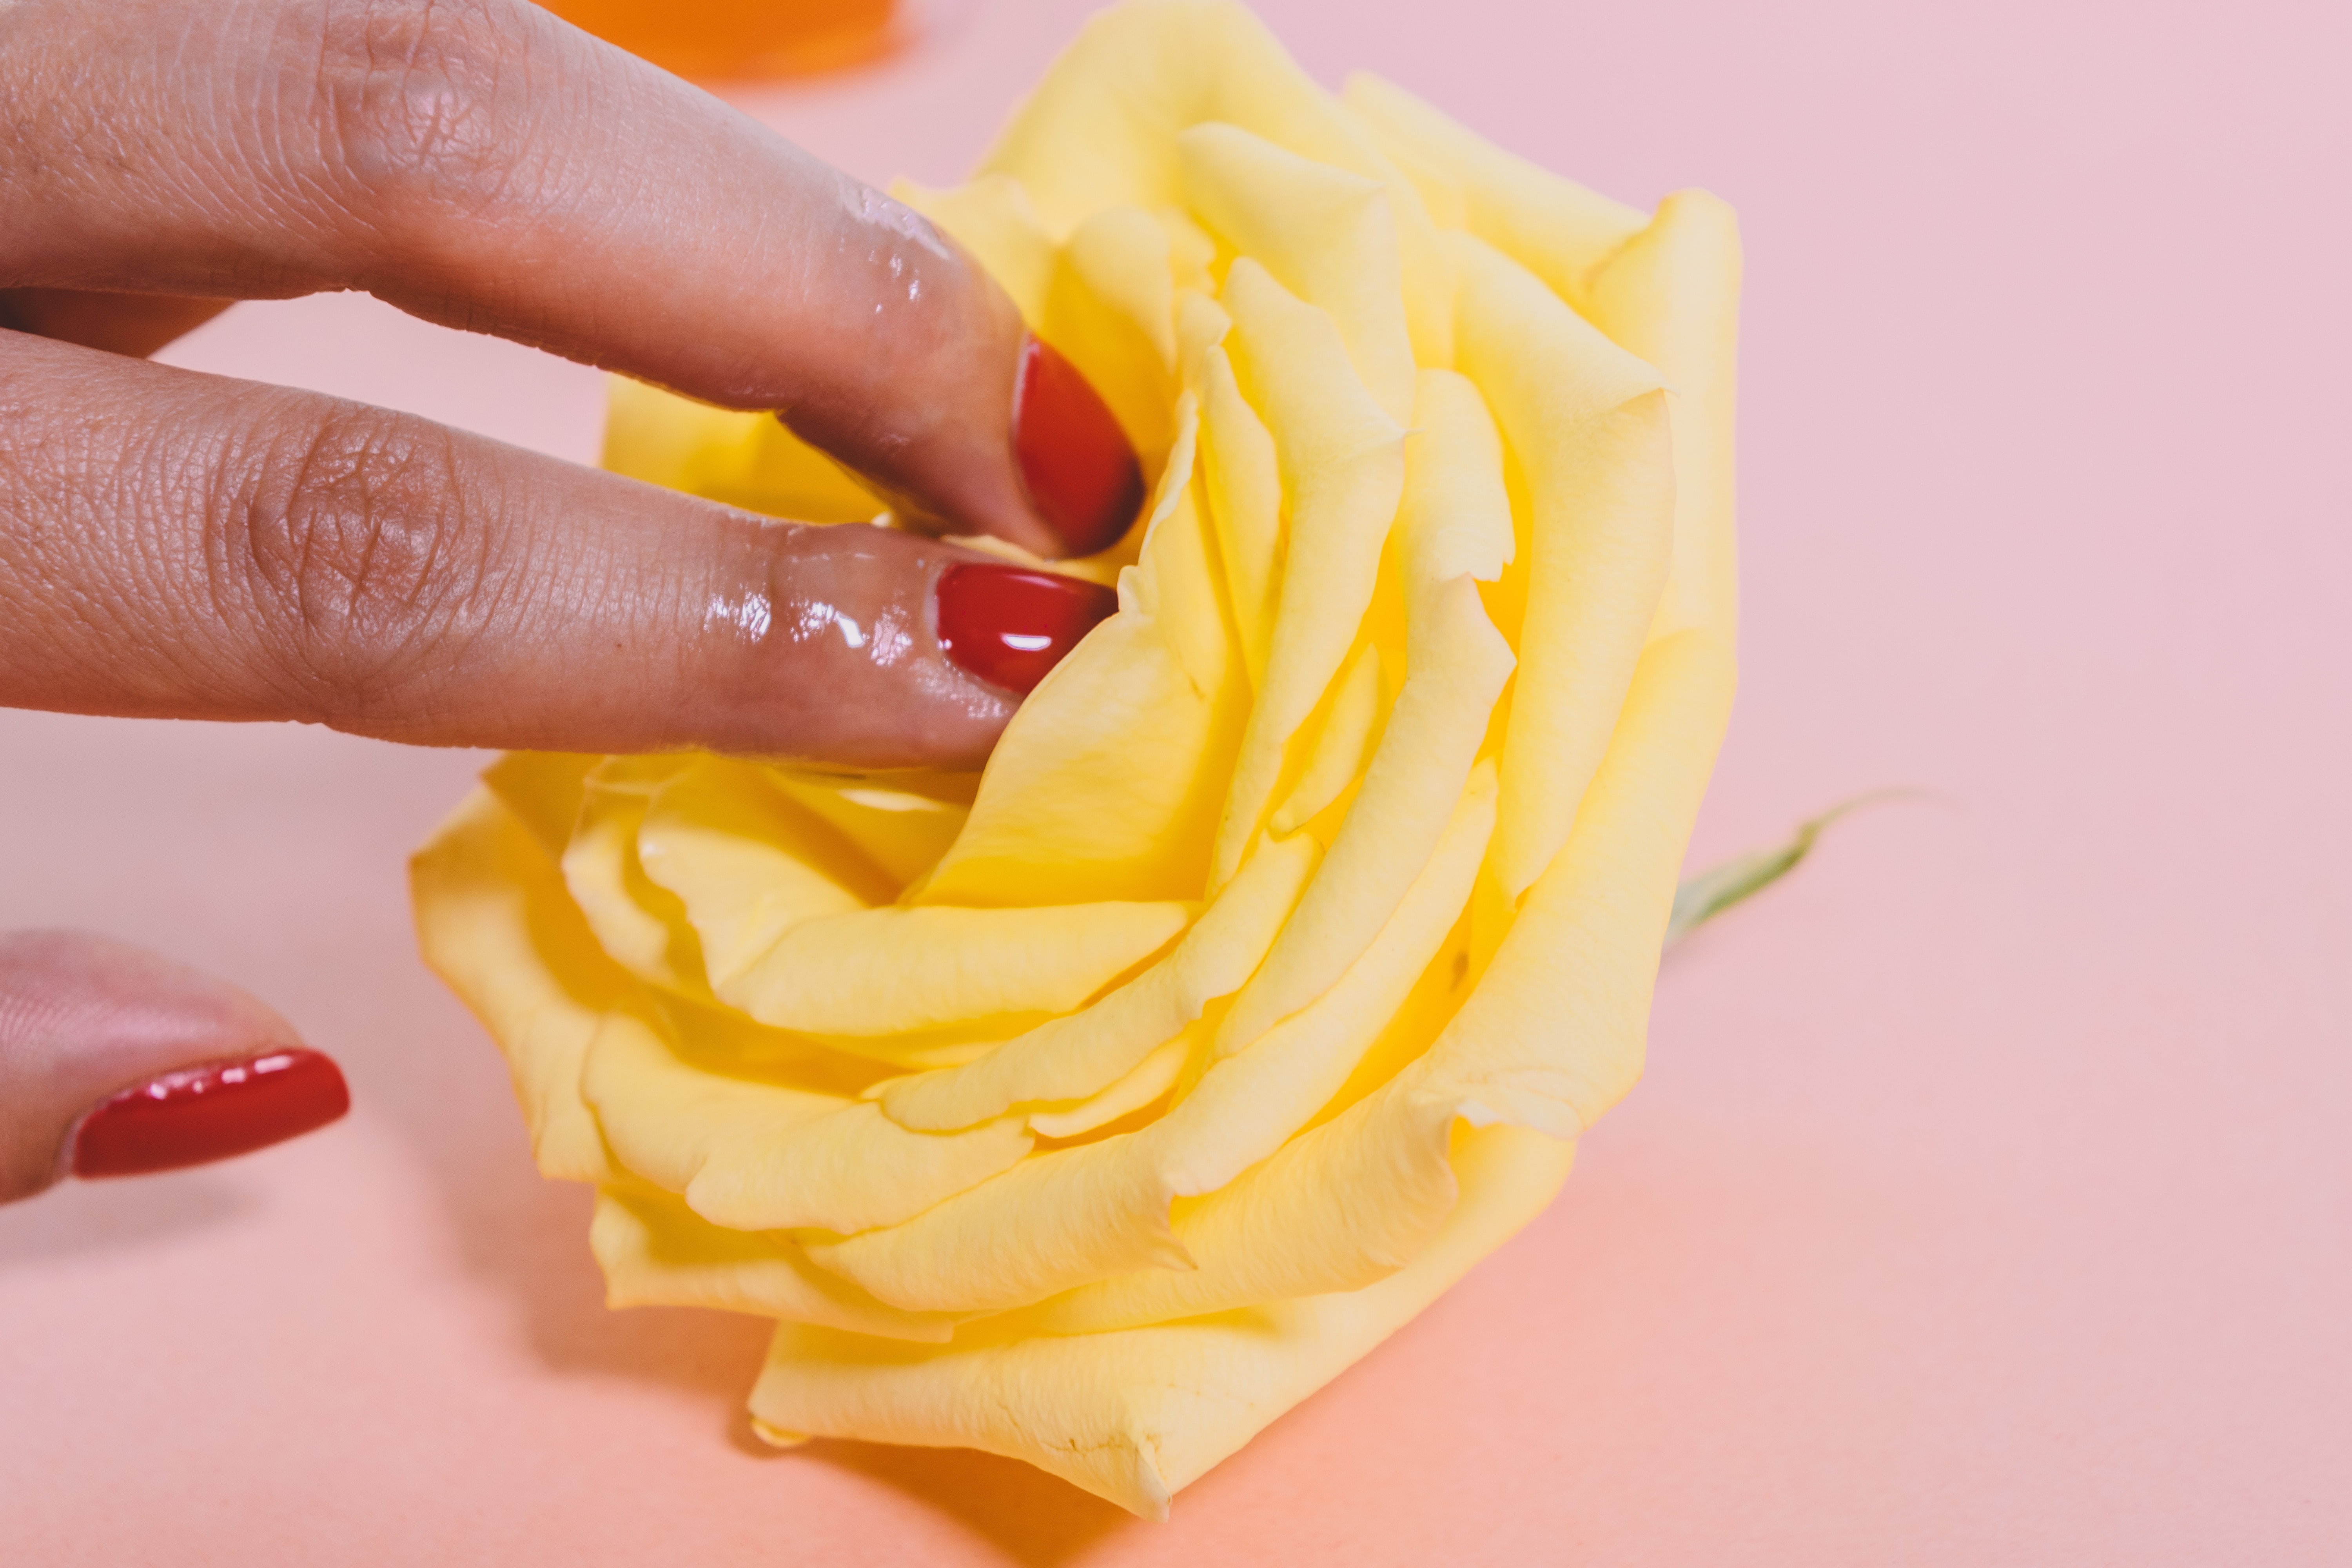 Person putting their wet fingers in the center of a yellow rose.